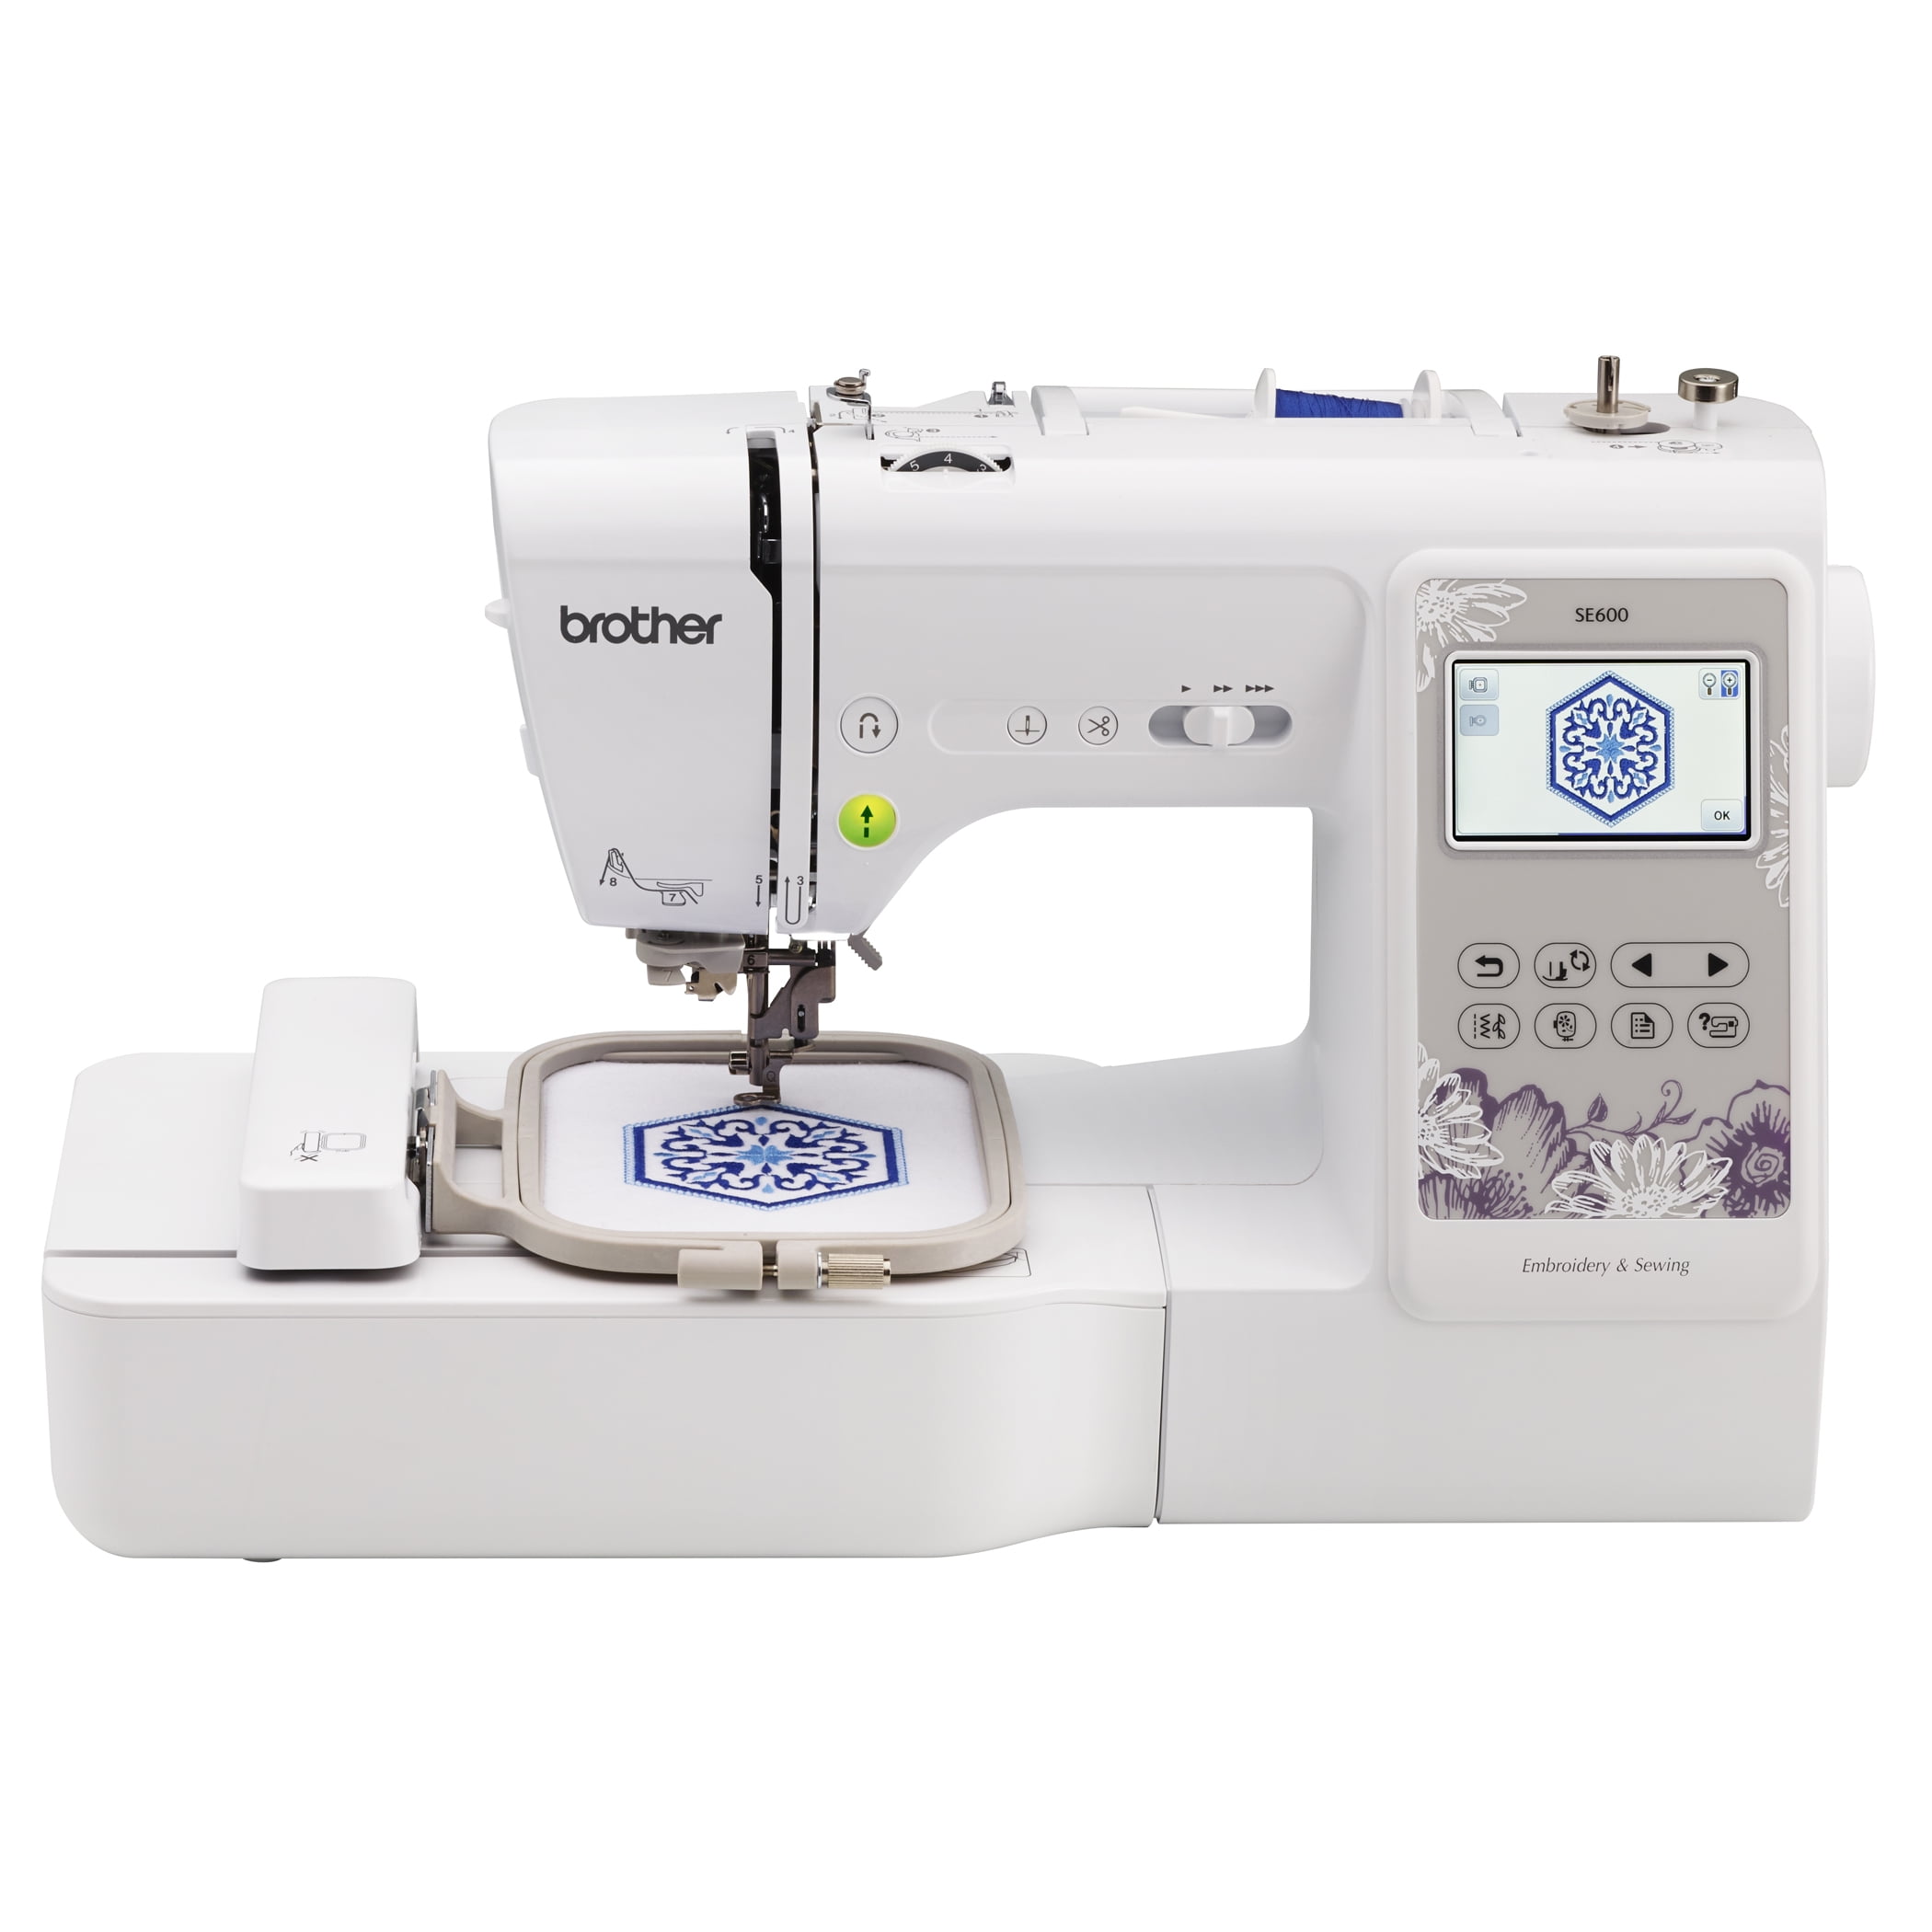 Brother Sewing Machine Case In other Sewing Machine Accessories for sale